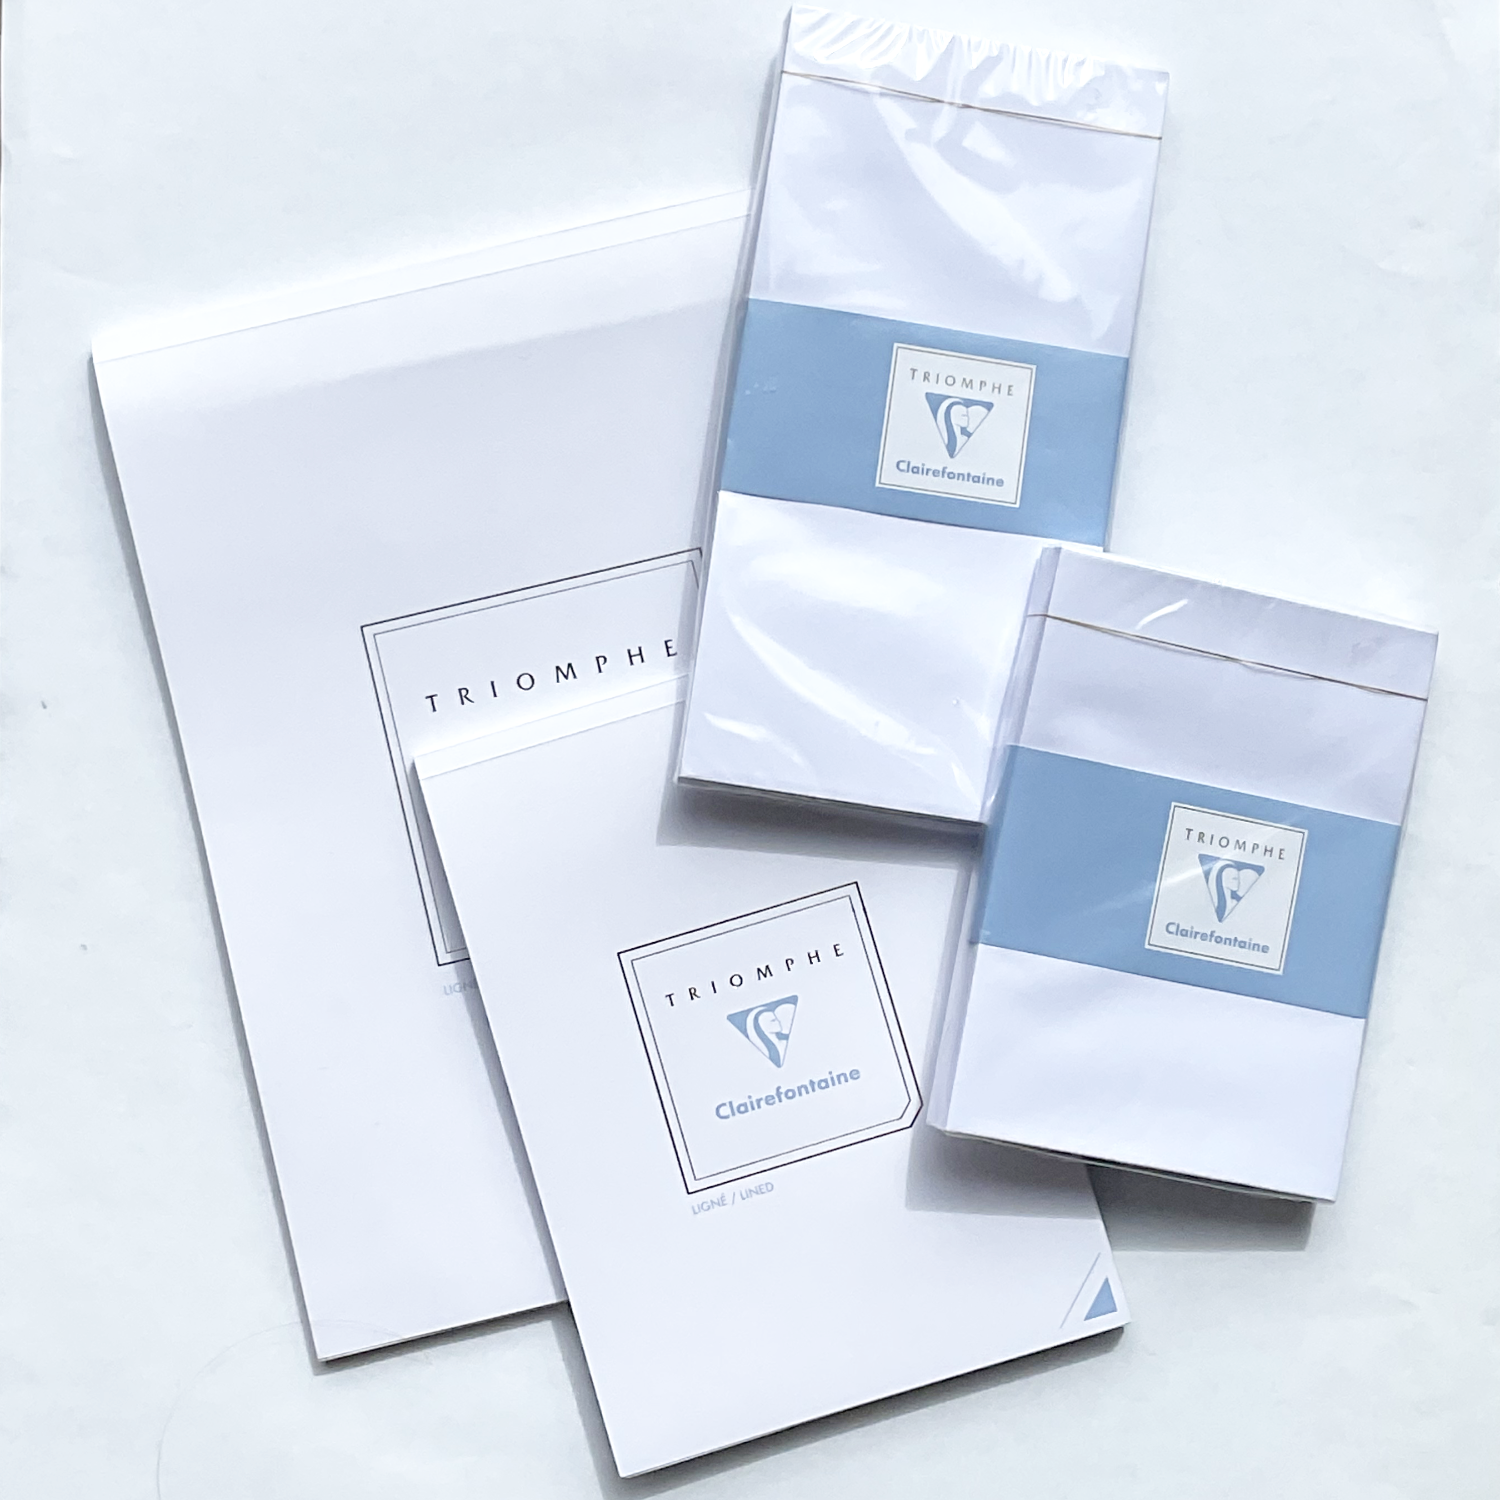 Clairefontaine Triomphe Stationery